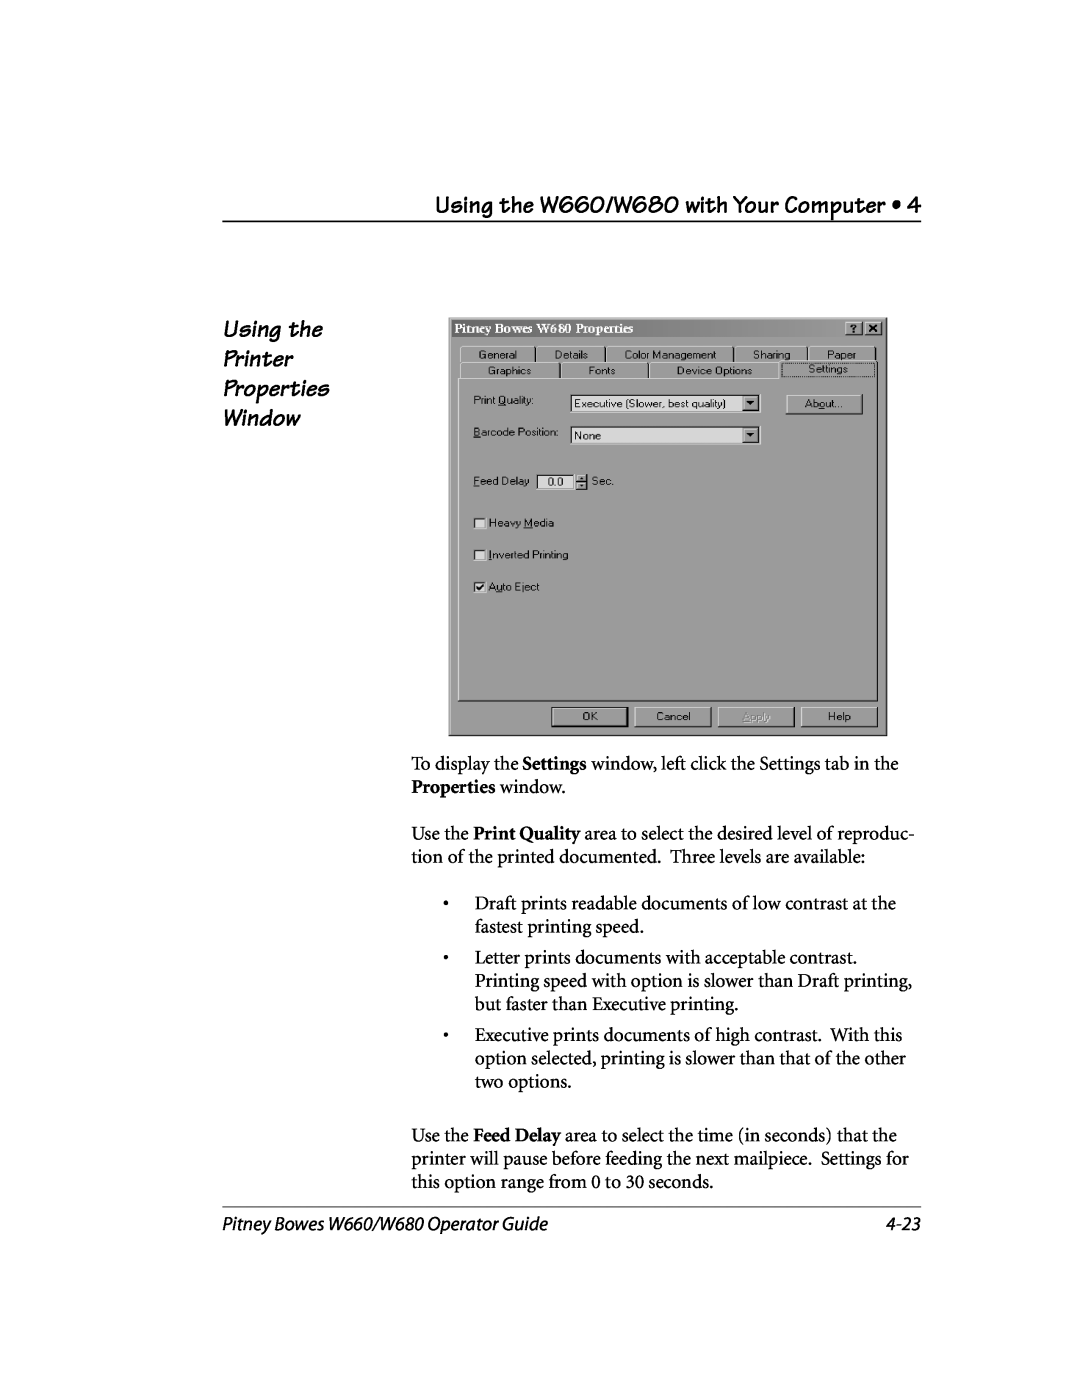 Pitney Bowes manual Using the W660/W680 with Your Computer, Using the Printer Properties Window, 4-23, Properties window 